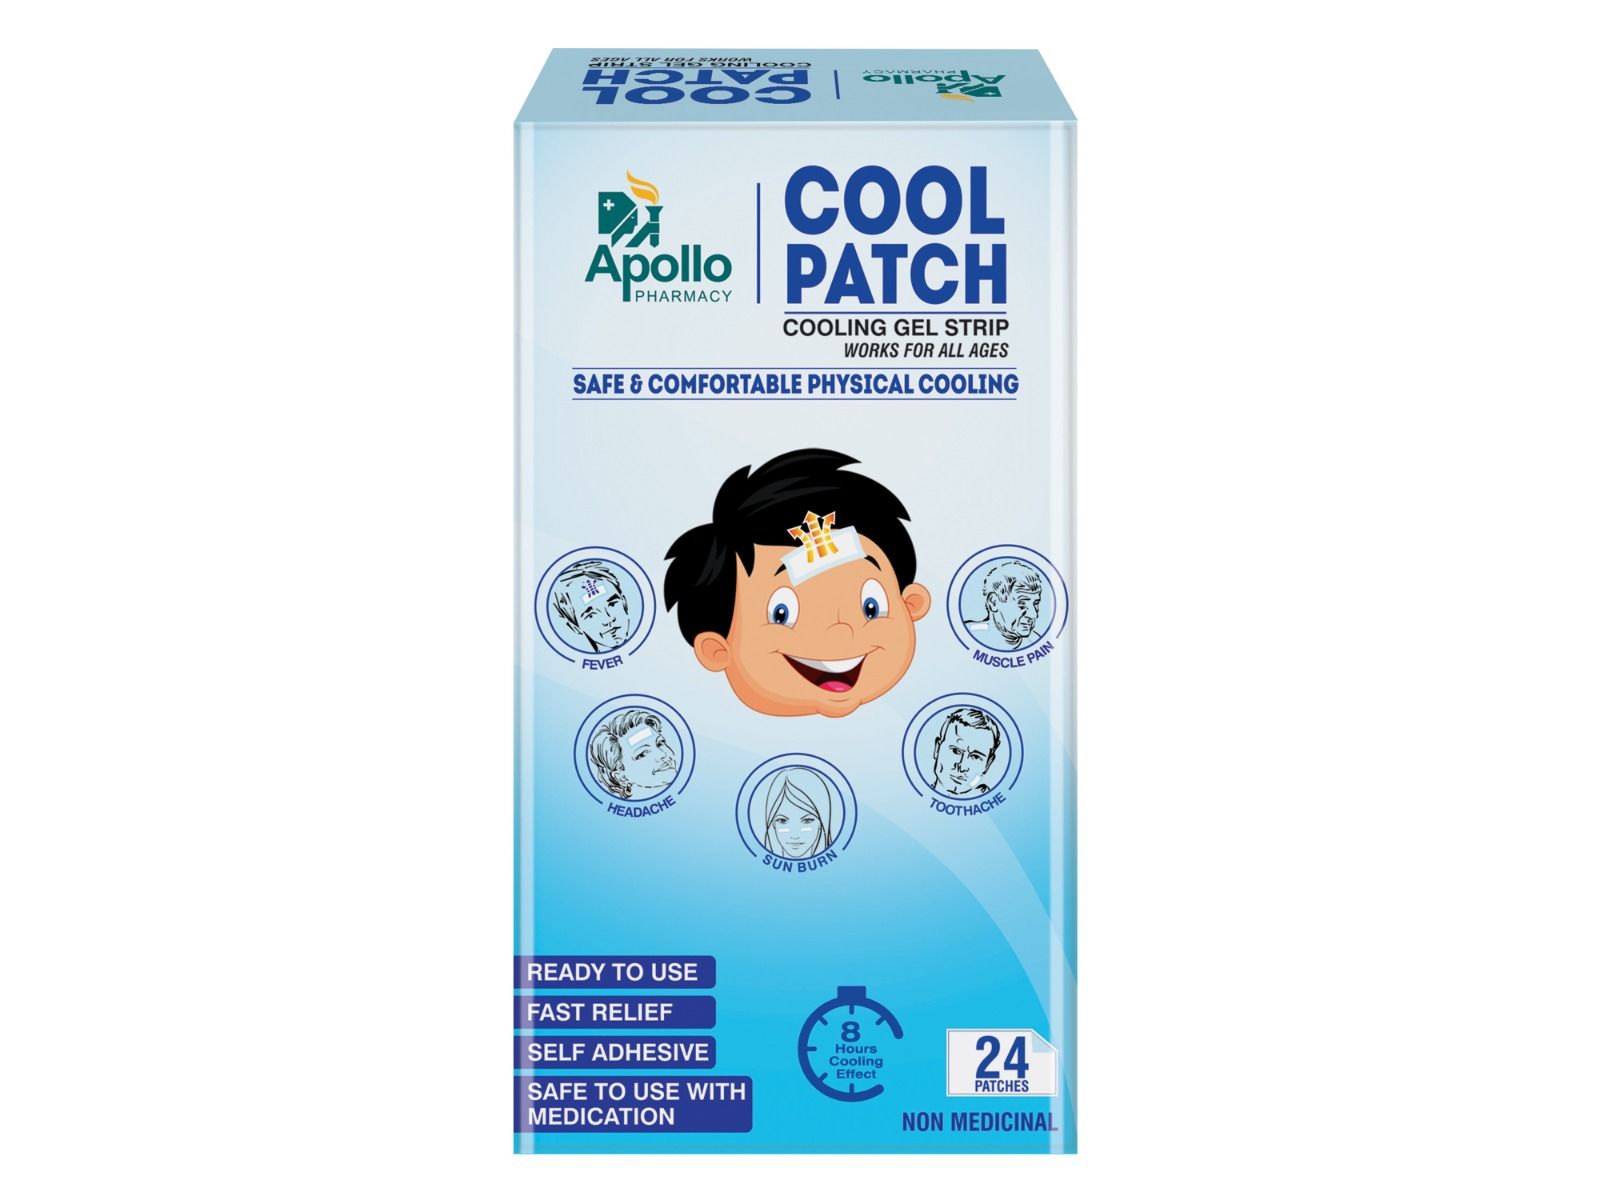 Apollo Pharmacy Cool Patch Cooling Gel Strip, 1 Count, Pack of 1 